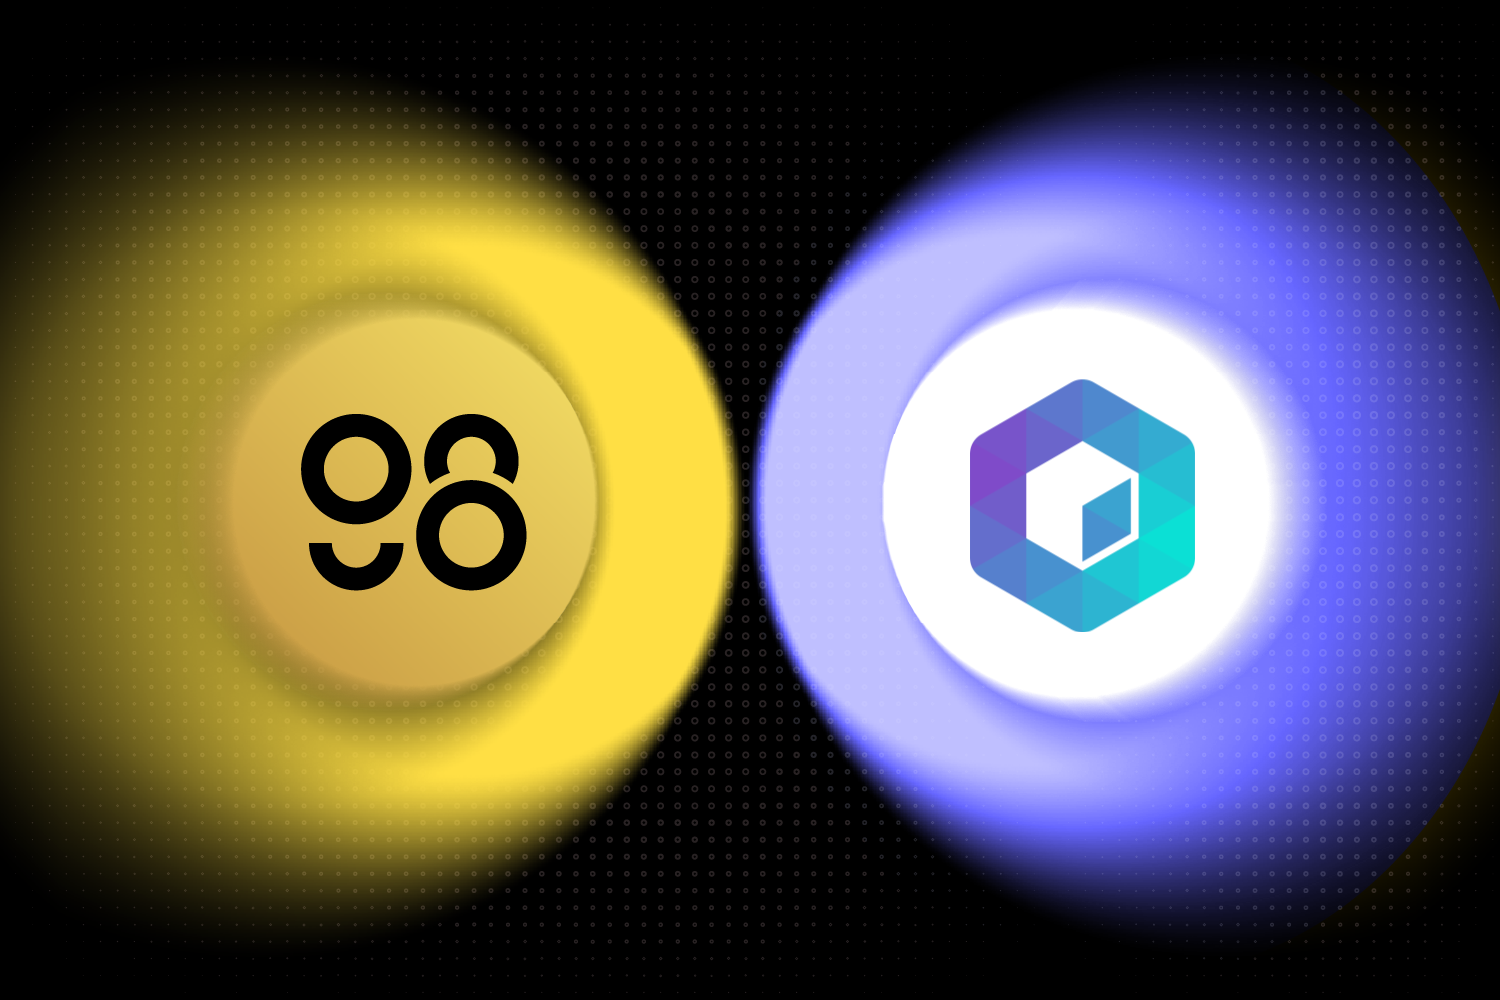 Coin98 ties up with Neblio to elevate users' accessibility to the blockchain